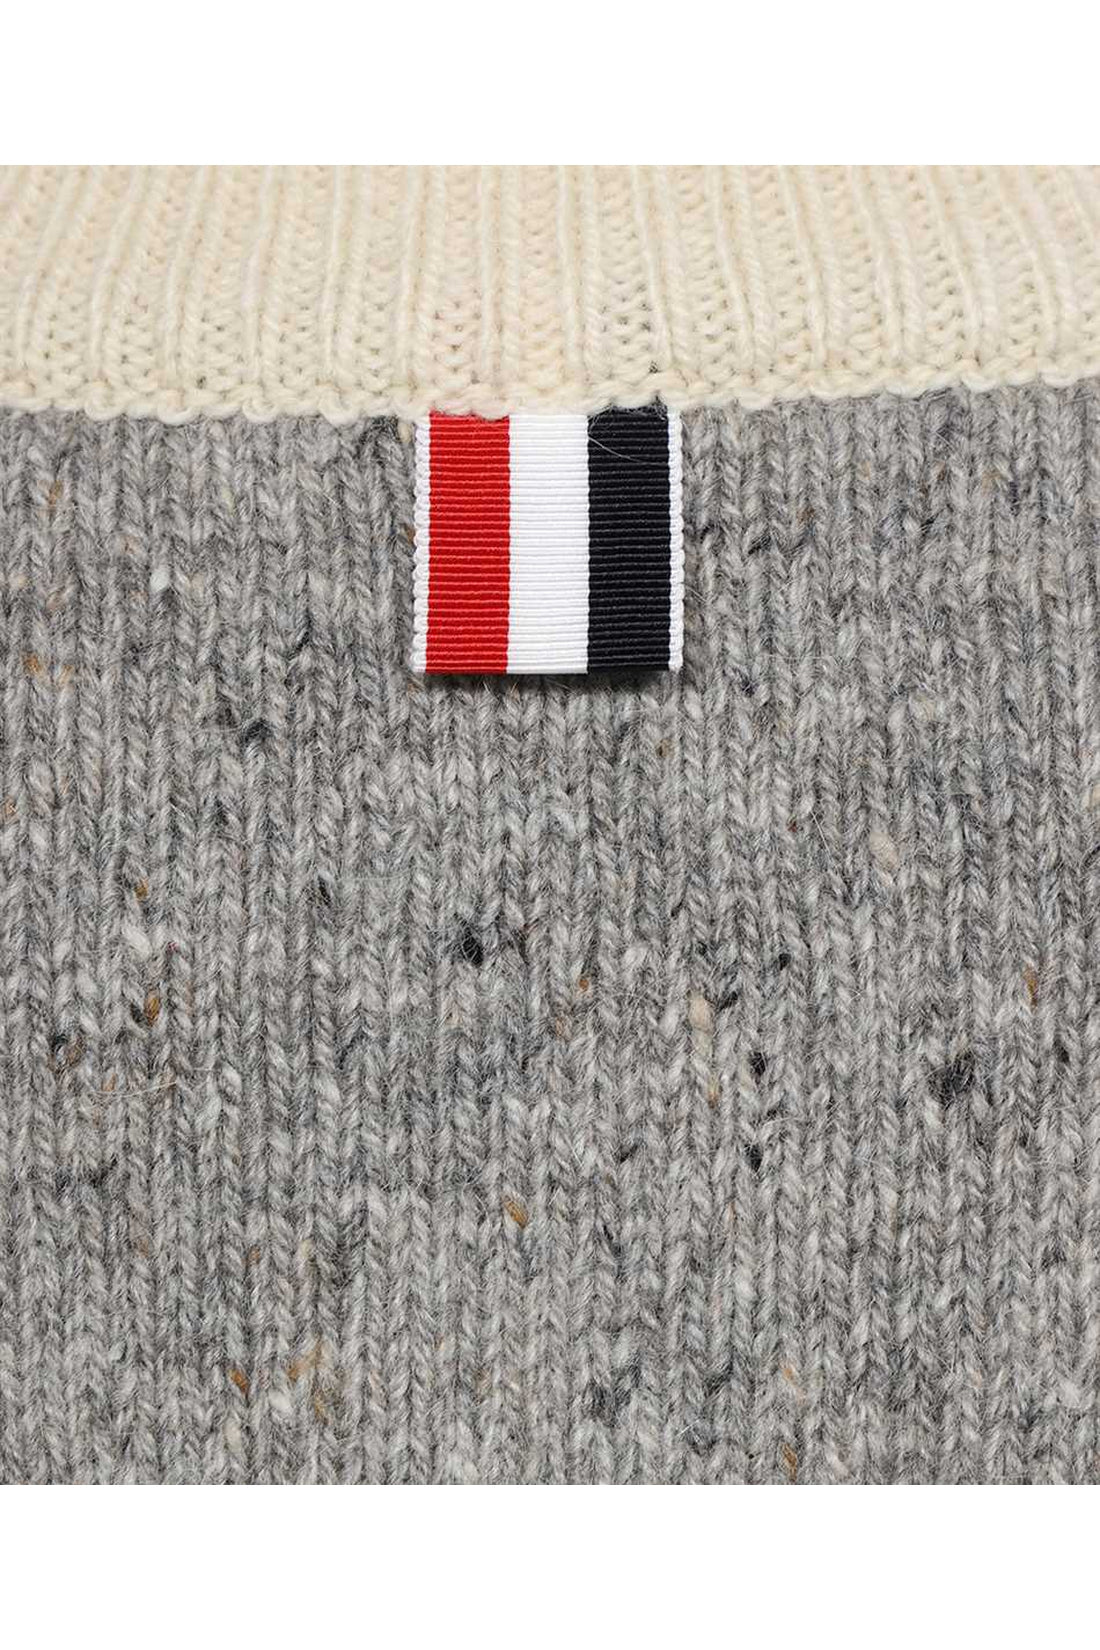 Thom Browne-OUTLET-SALE-Wool blend pullover-ARCHIVIST